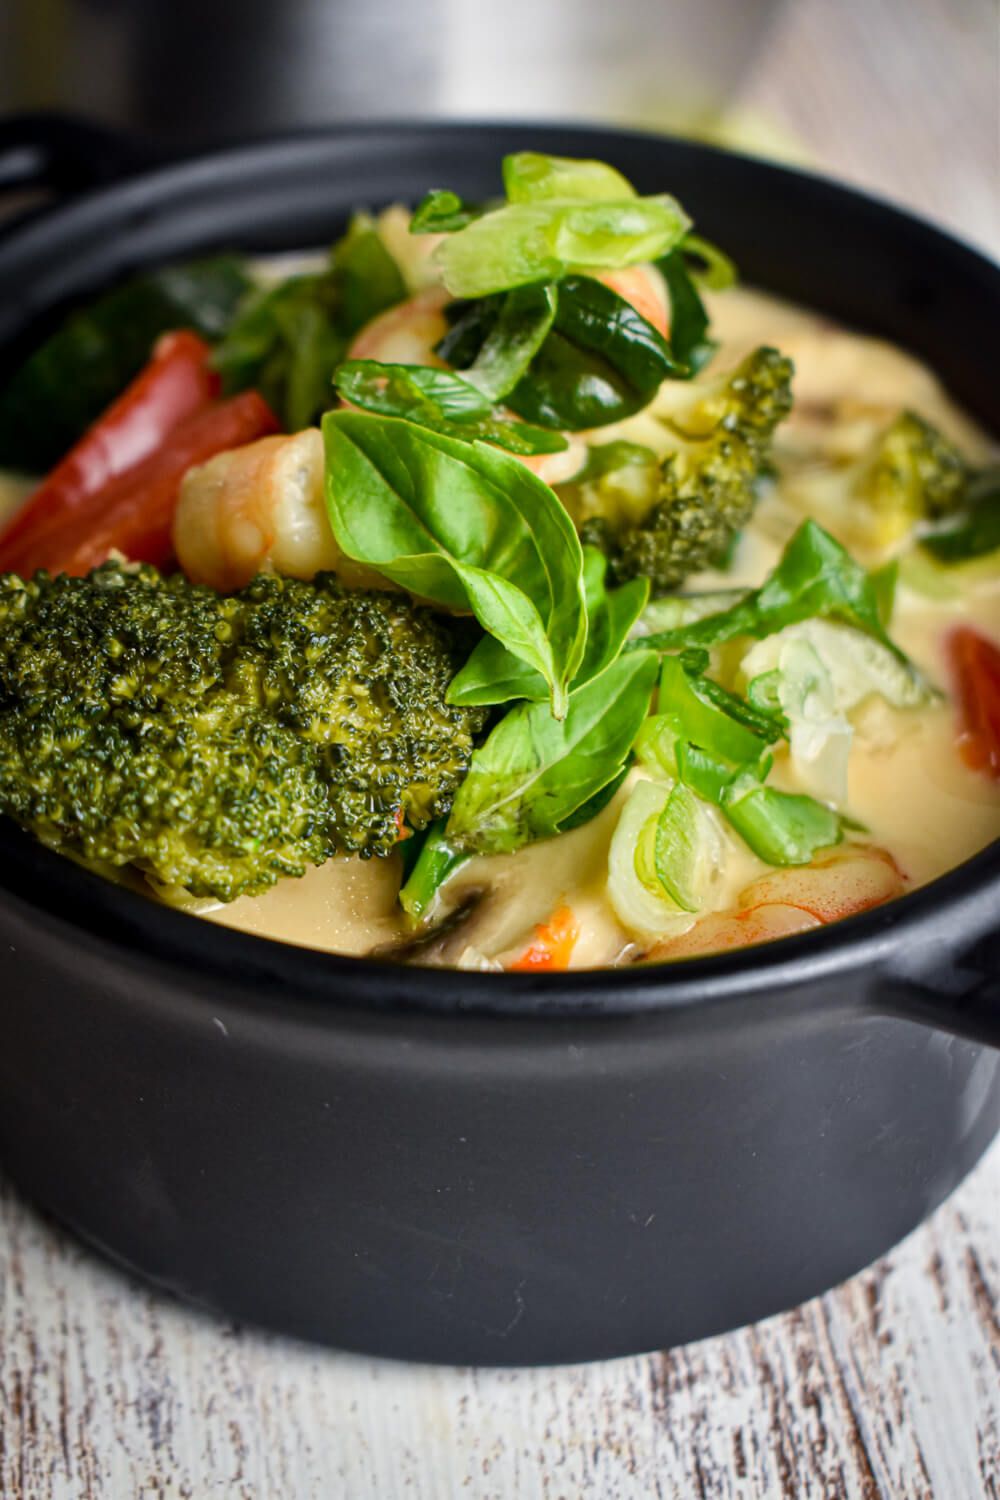 Curry shrimp with coconut milk, fresh vegetables, Thai green curry paste, and basil in a black dish with fresh limes.